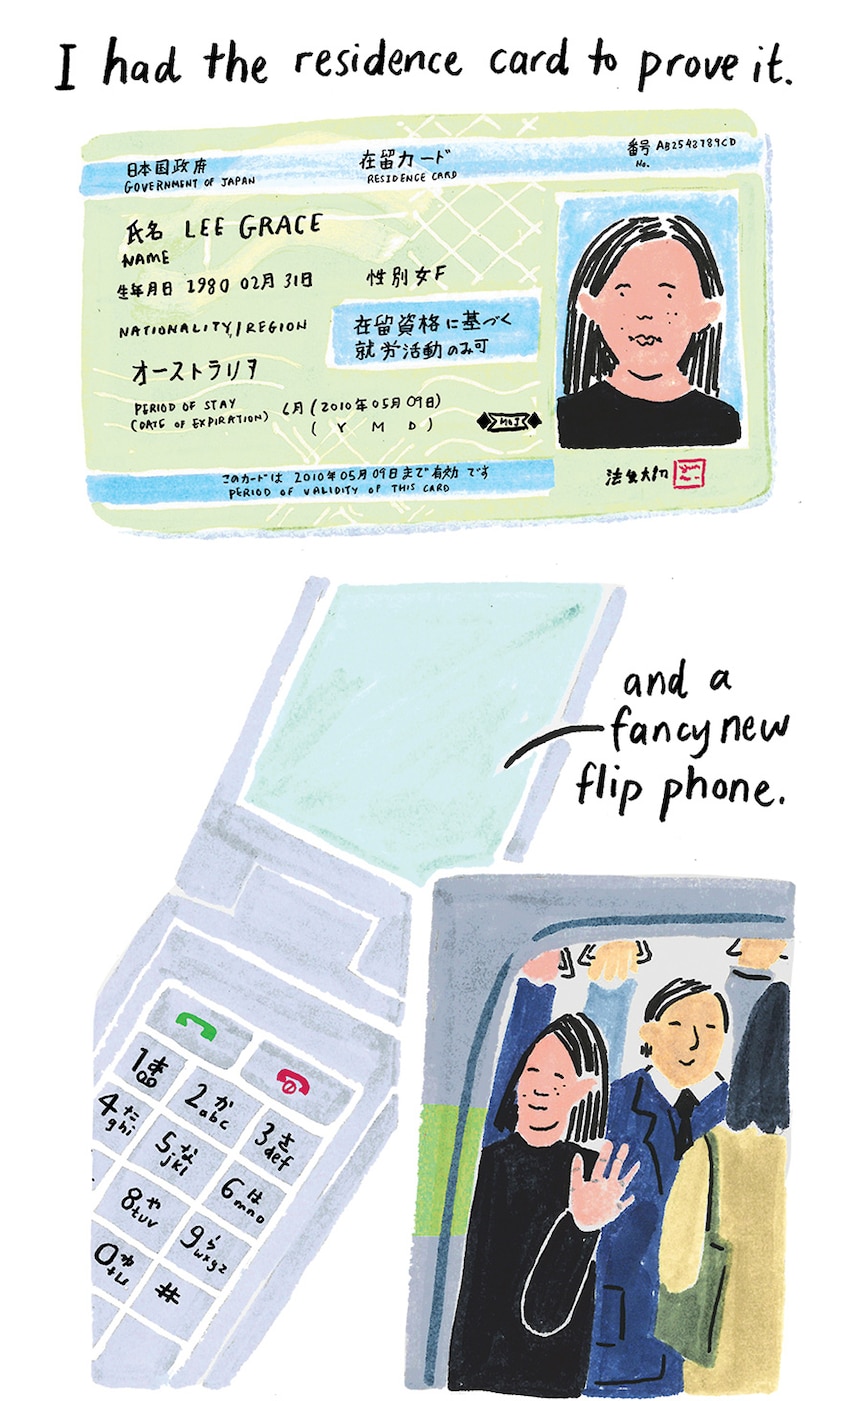 "I had the residence card to prove it [pic of Grace's card] and a fancy new flip phone [pic of phone]."